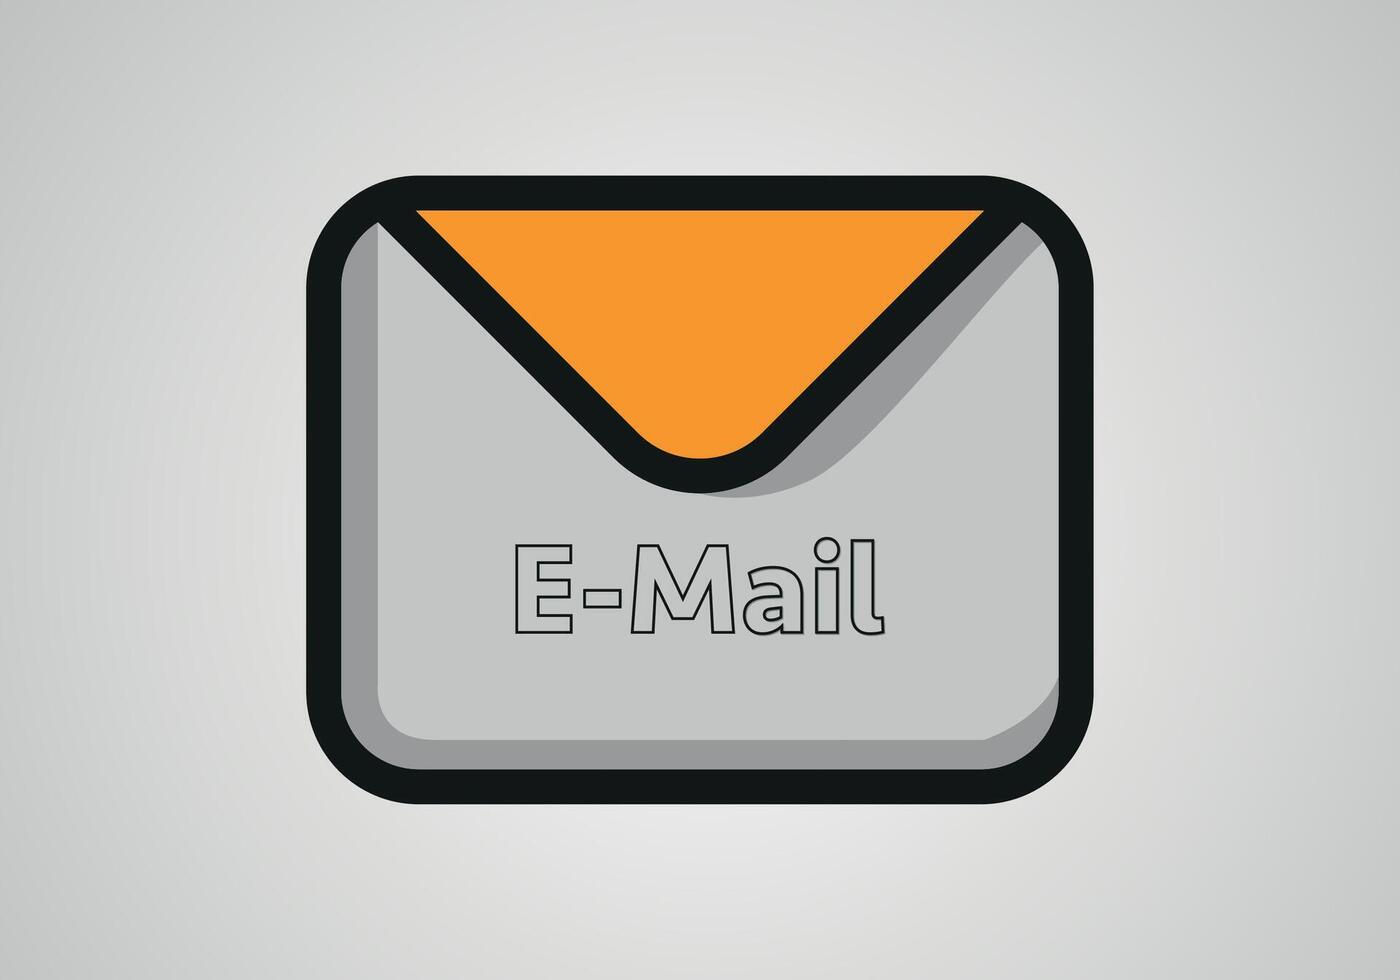 Mail envelope icon in flat style. Receive email letter spam vector illustration on white background. Mail communication business concept.